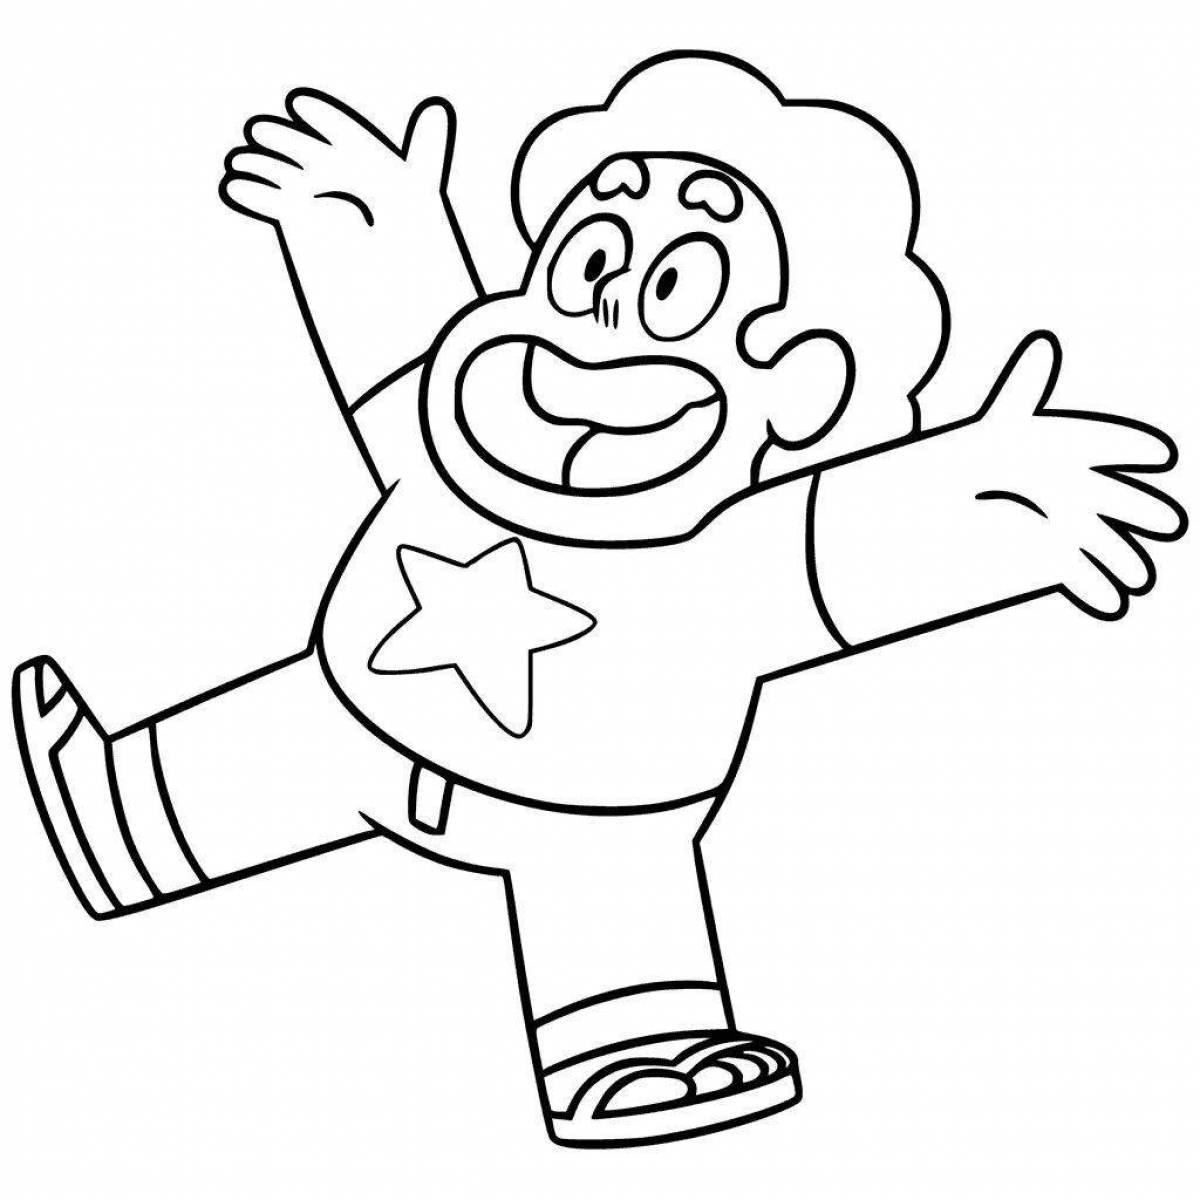 Steven universe freaky coloring book